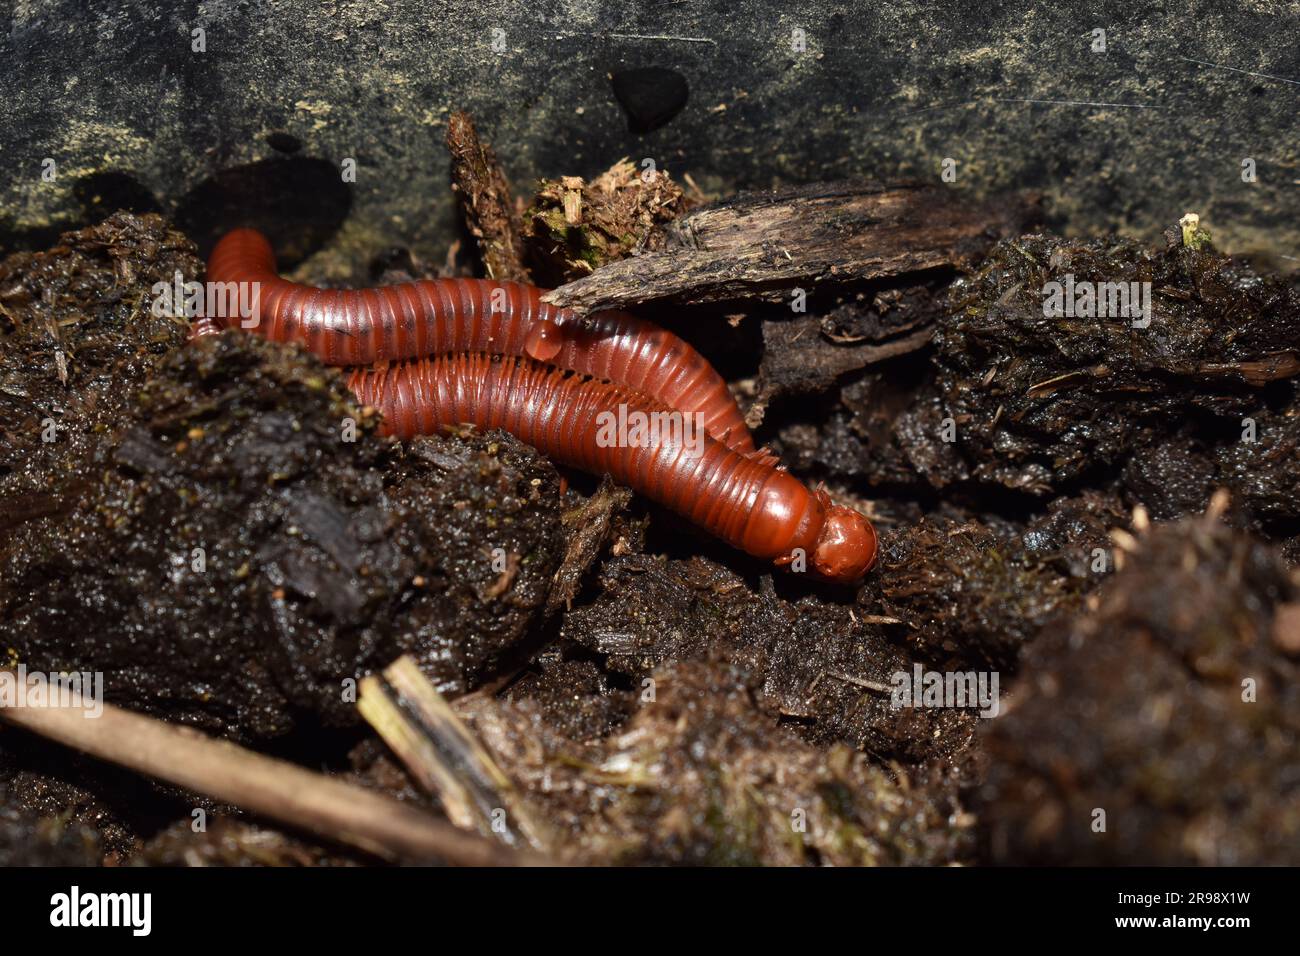 Trigoniulus corallinus or two rusty millipedes mating in some agricultural soil in Trinidad and Tobago, West Indies. Stock Photo